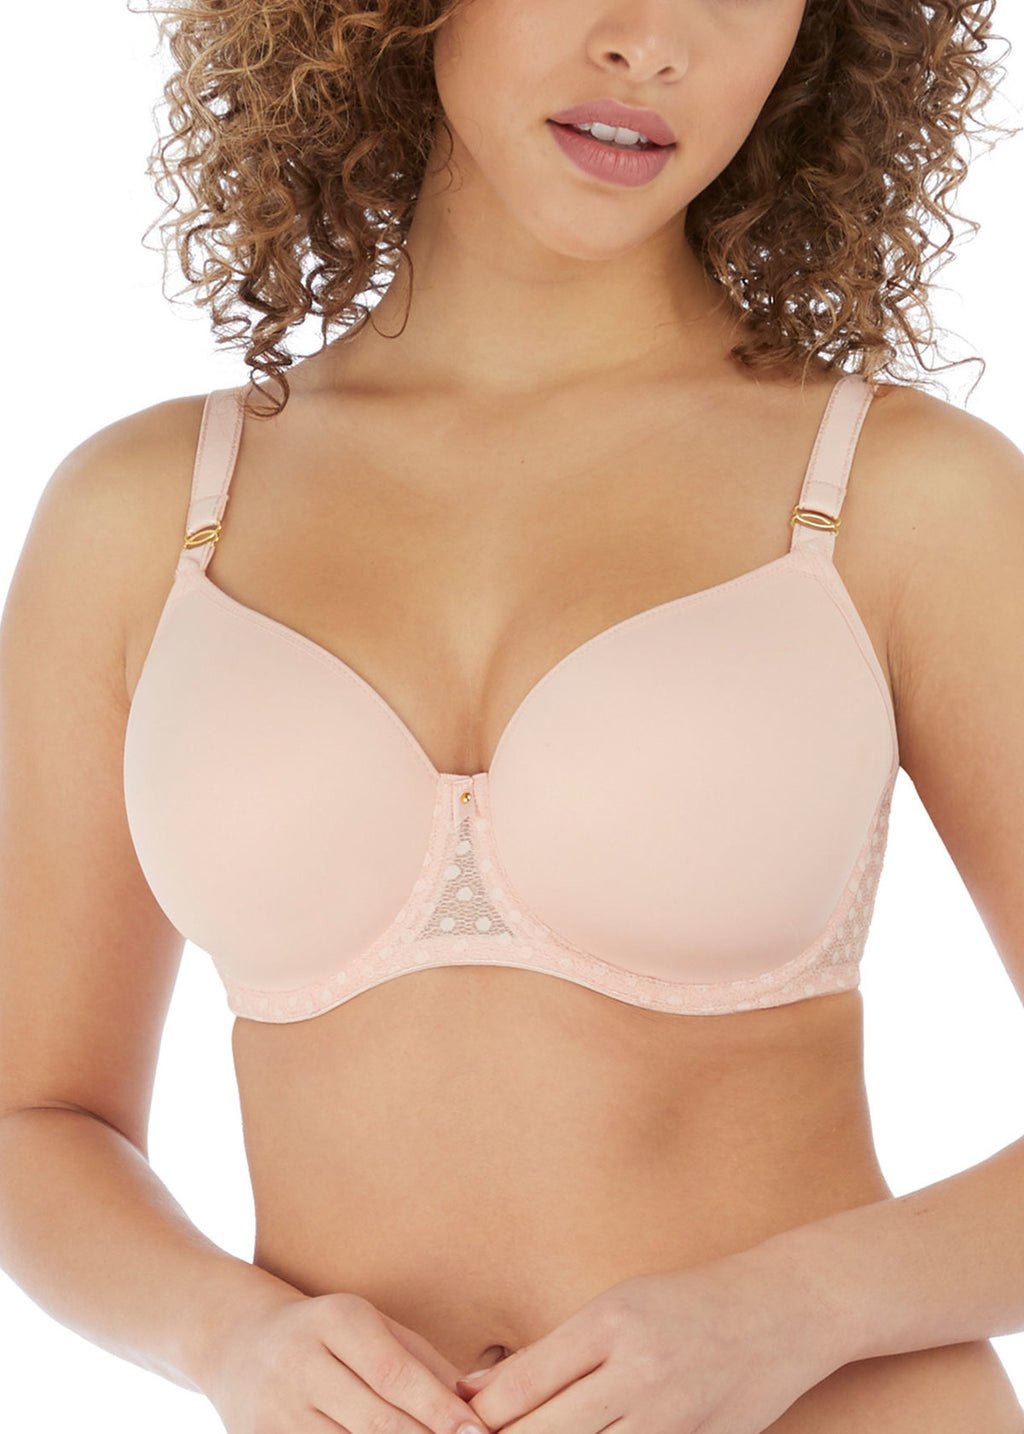 Freya Moulded Bra - Natural Beige - An Intimate Affaire